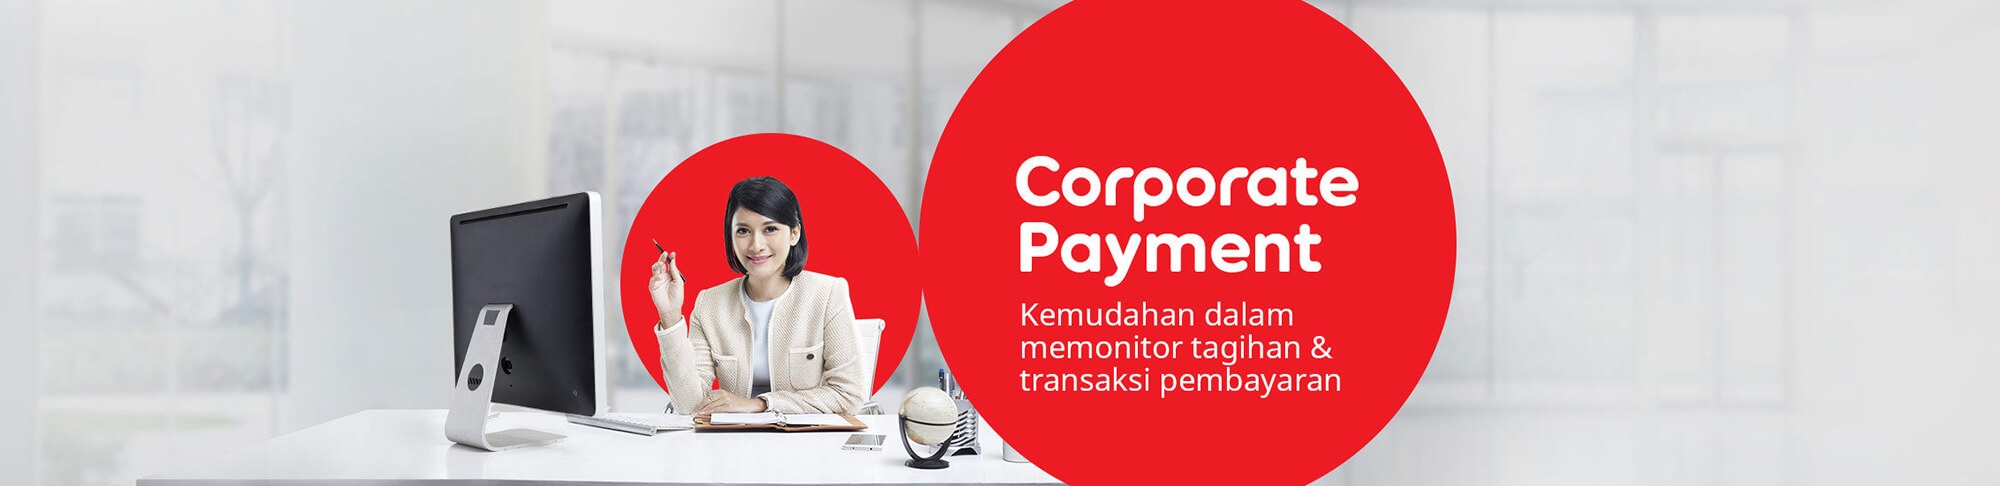 Business Corporate Payment